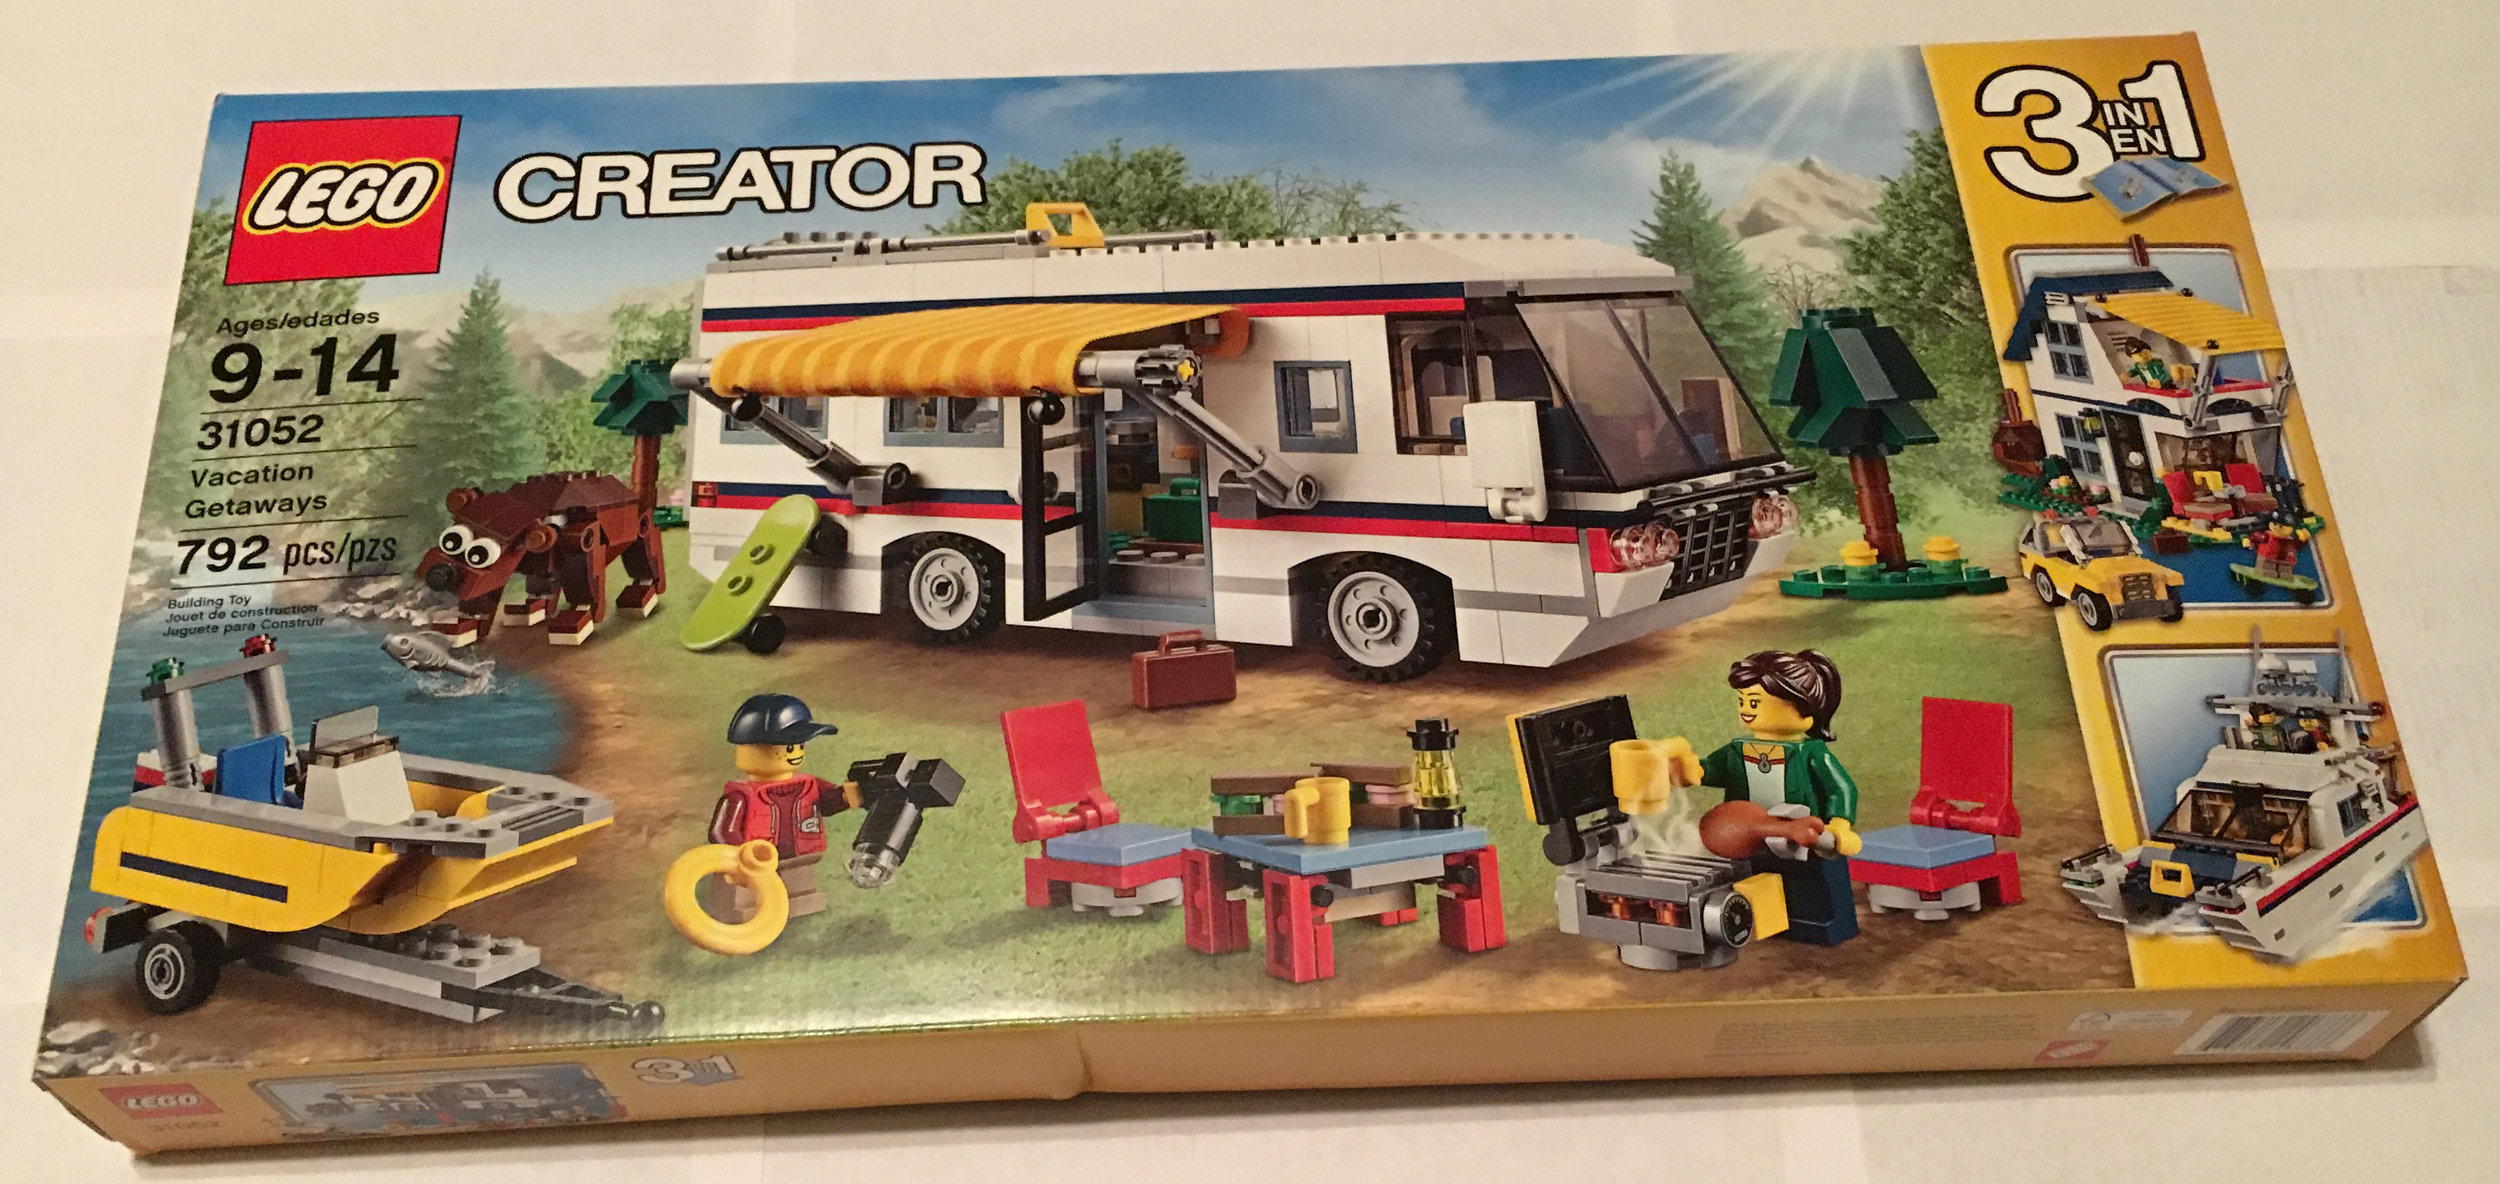 792 Pieces LEGO Creator 31052 Vacation Getaways Building Kit By Lego For kids